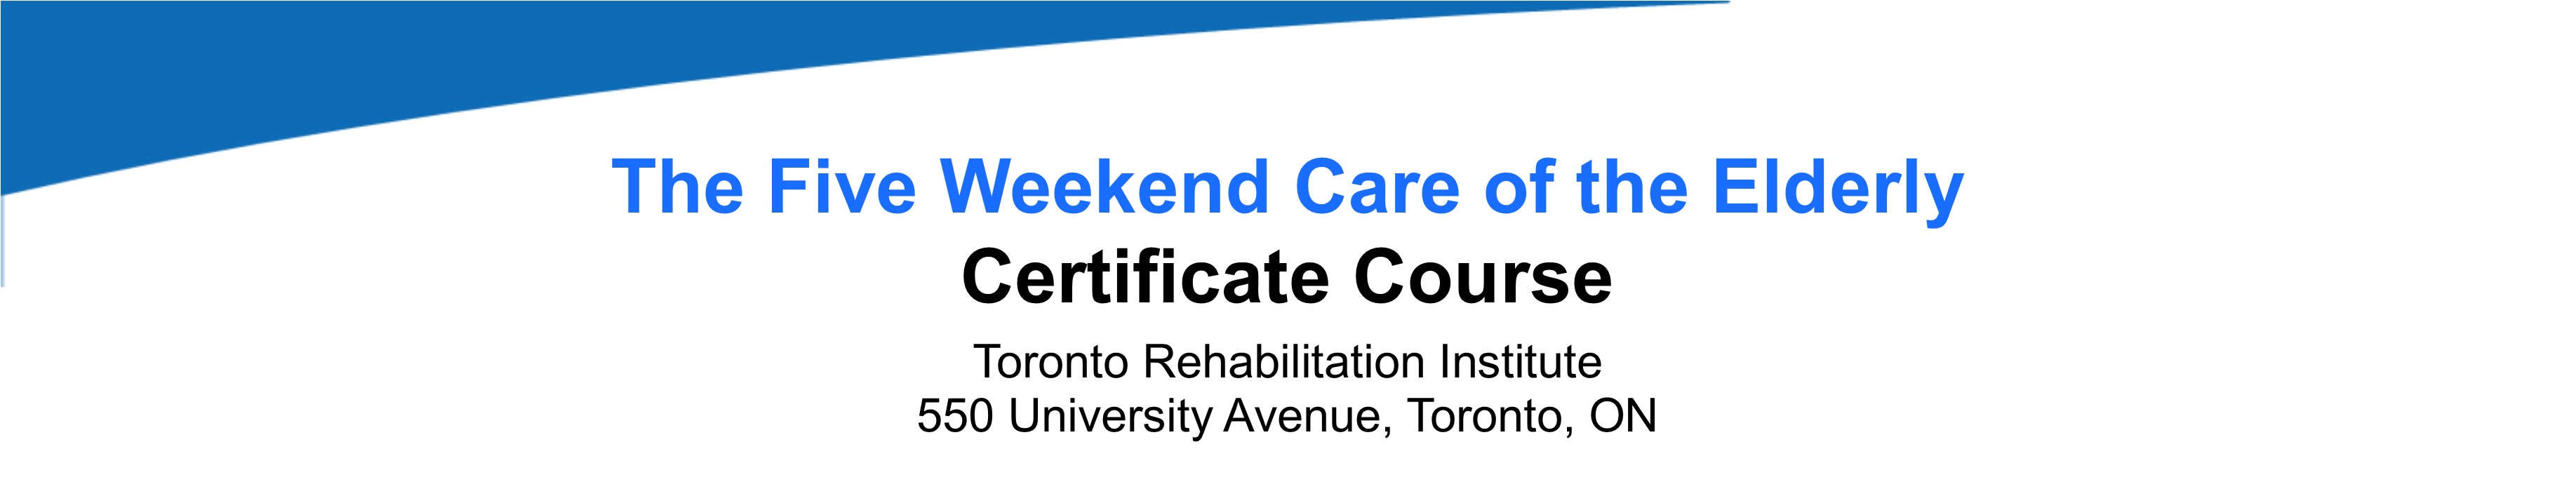 2019 Five Weekend Care of the Elderly Certificate Course